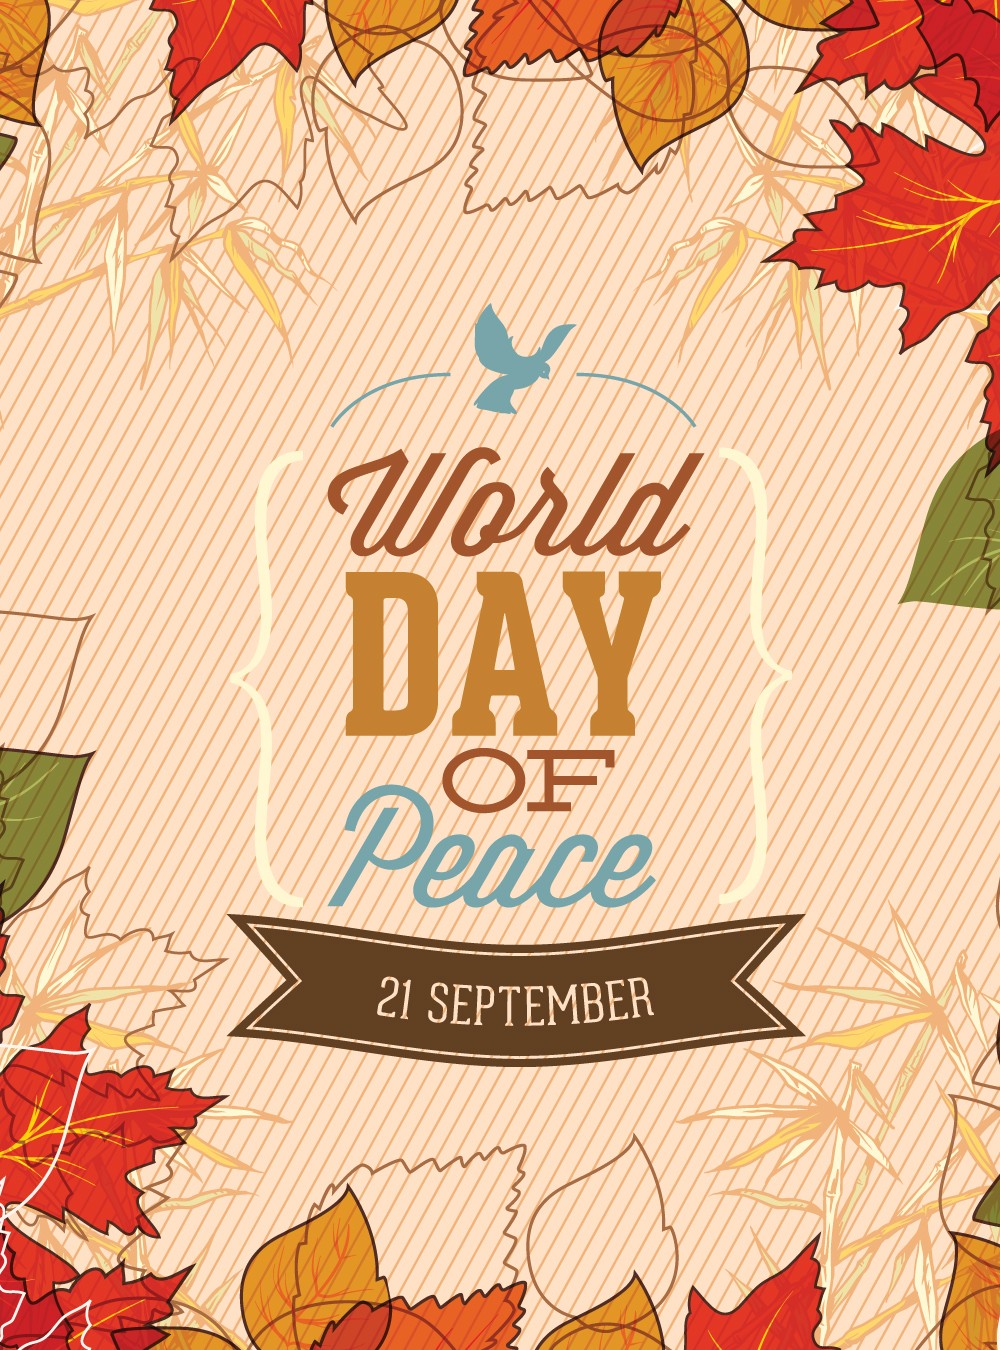 World Day Of Peace 21 September Greeting Card